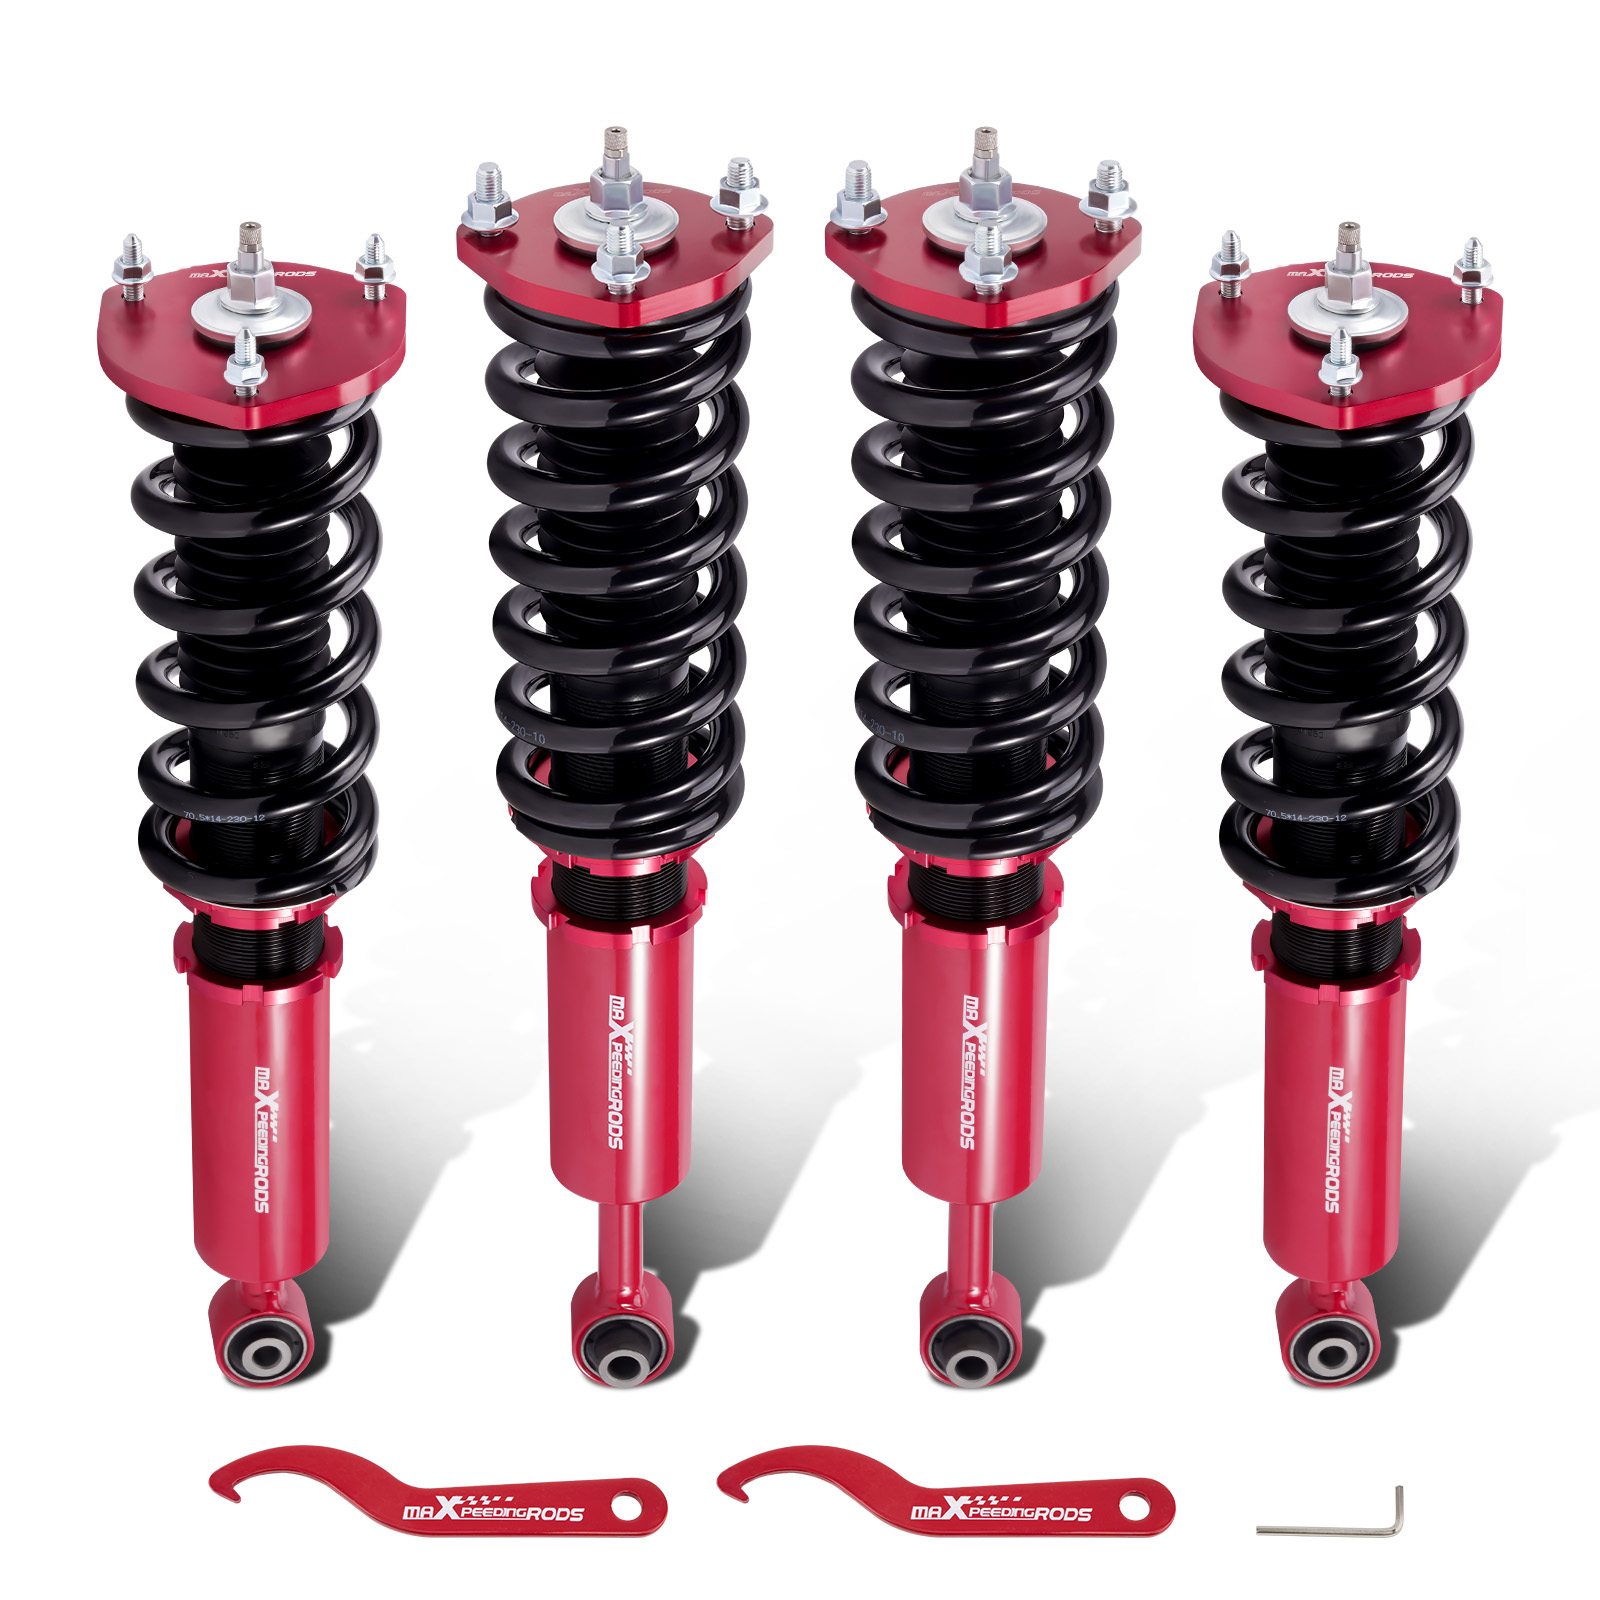 Coilovers Suspension 24 Way Damper Shocks Absorbers For Lexus IS300 2000-2005